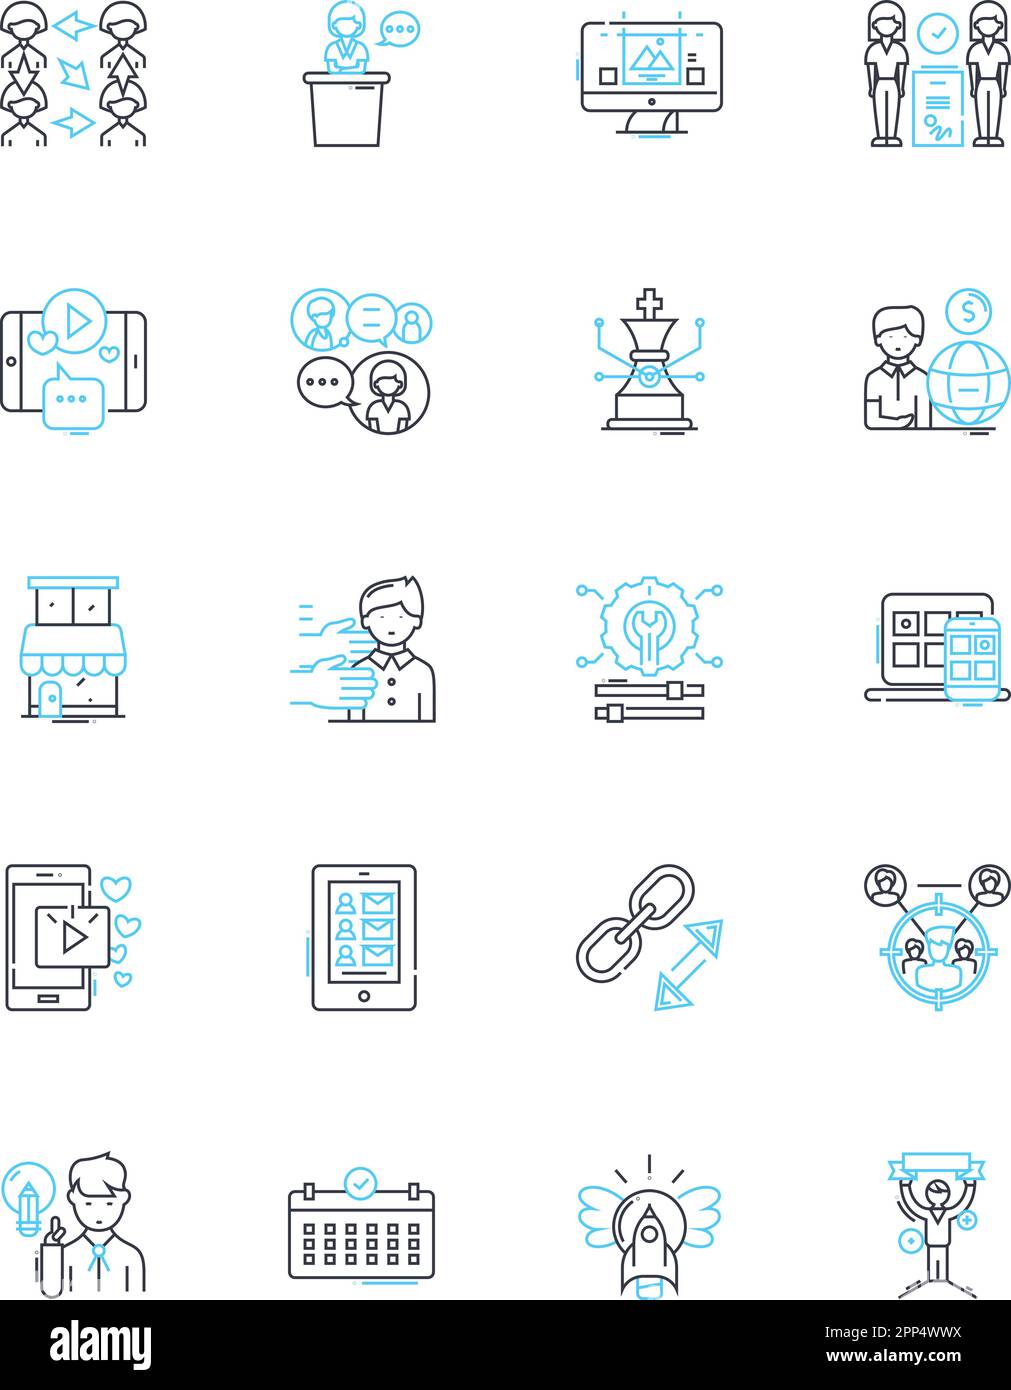 Communication skills linear icons set. Listening, Speaking, Writing, Nonverbal, Feedback, Empathy, Clarity line vector and concept signs. Connection Stock Vector